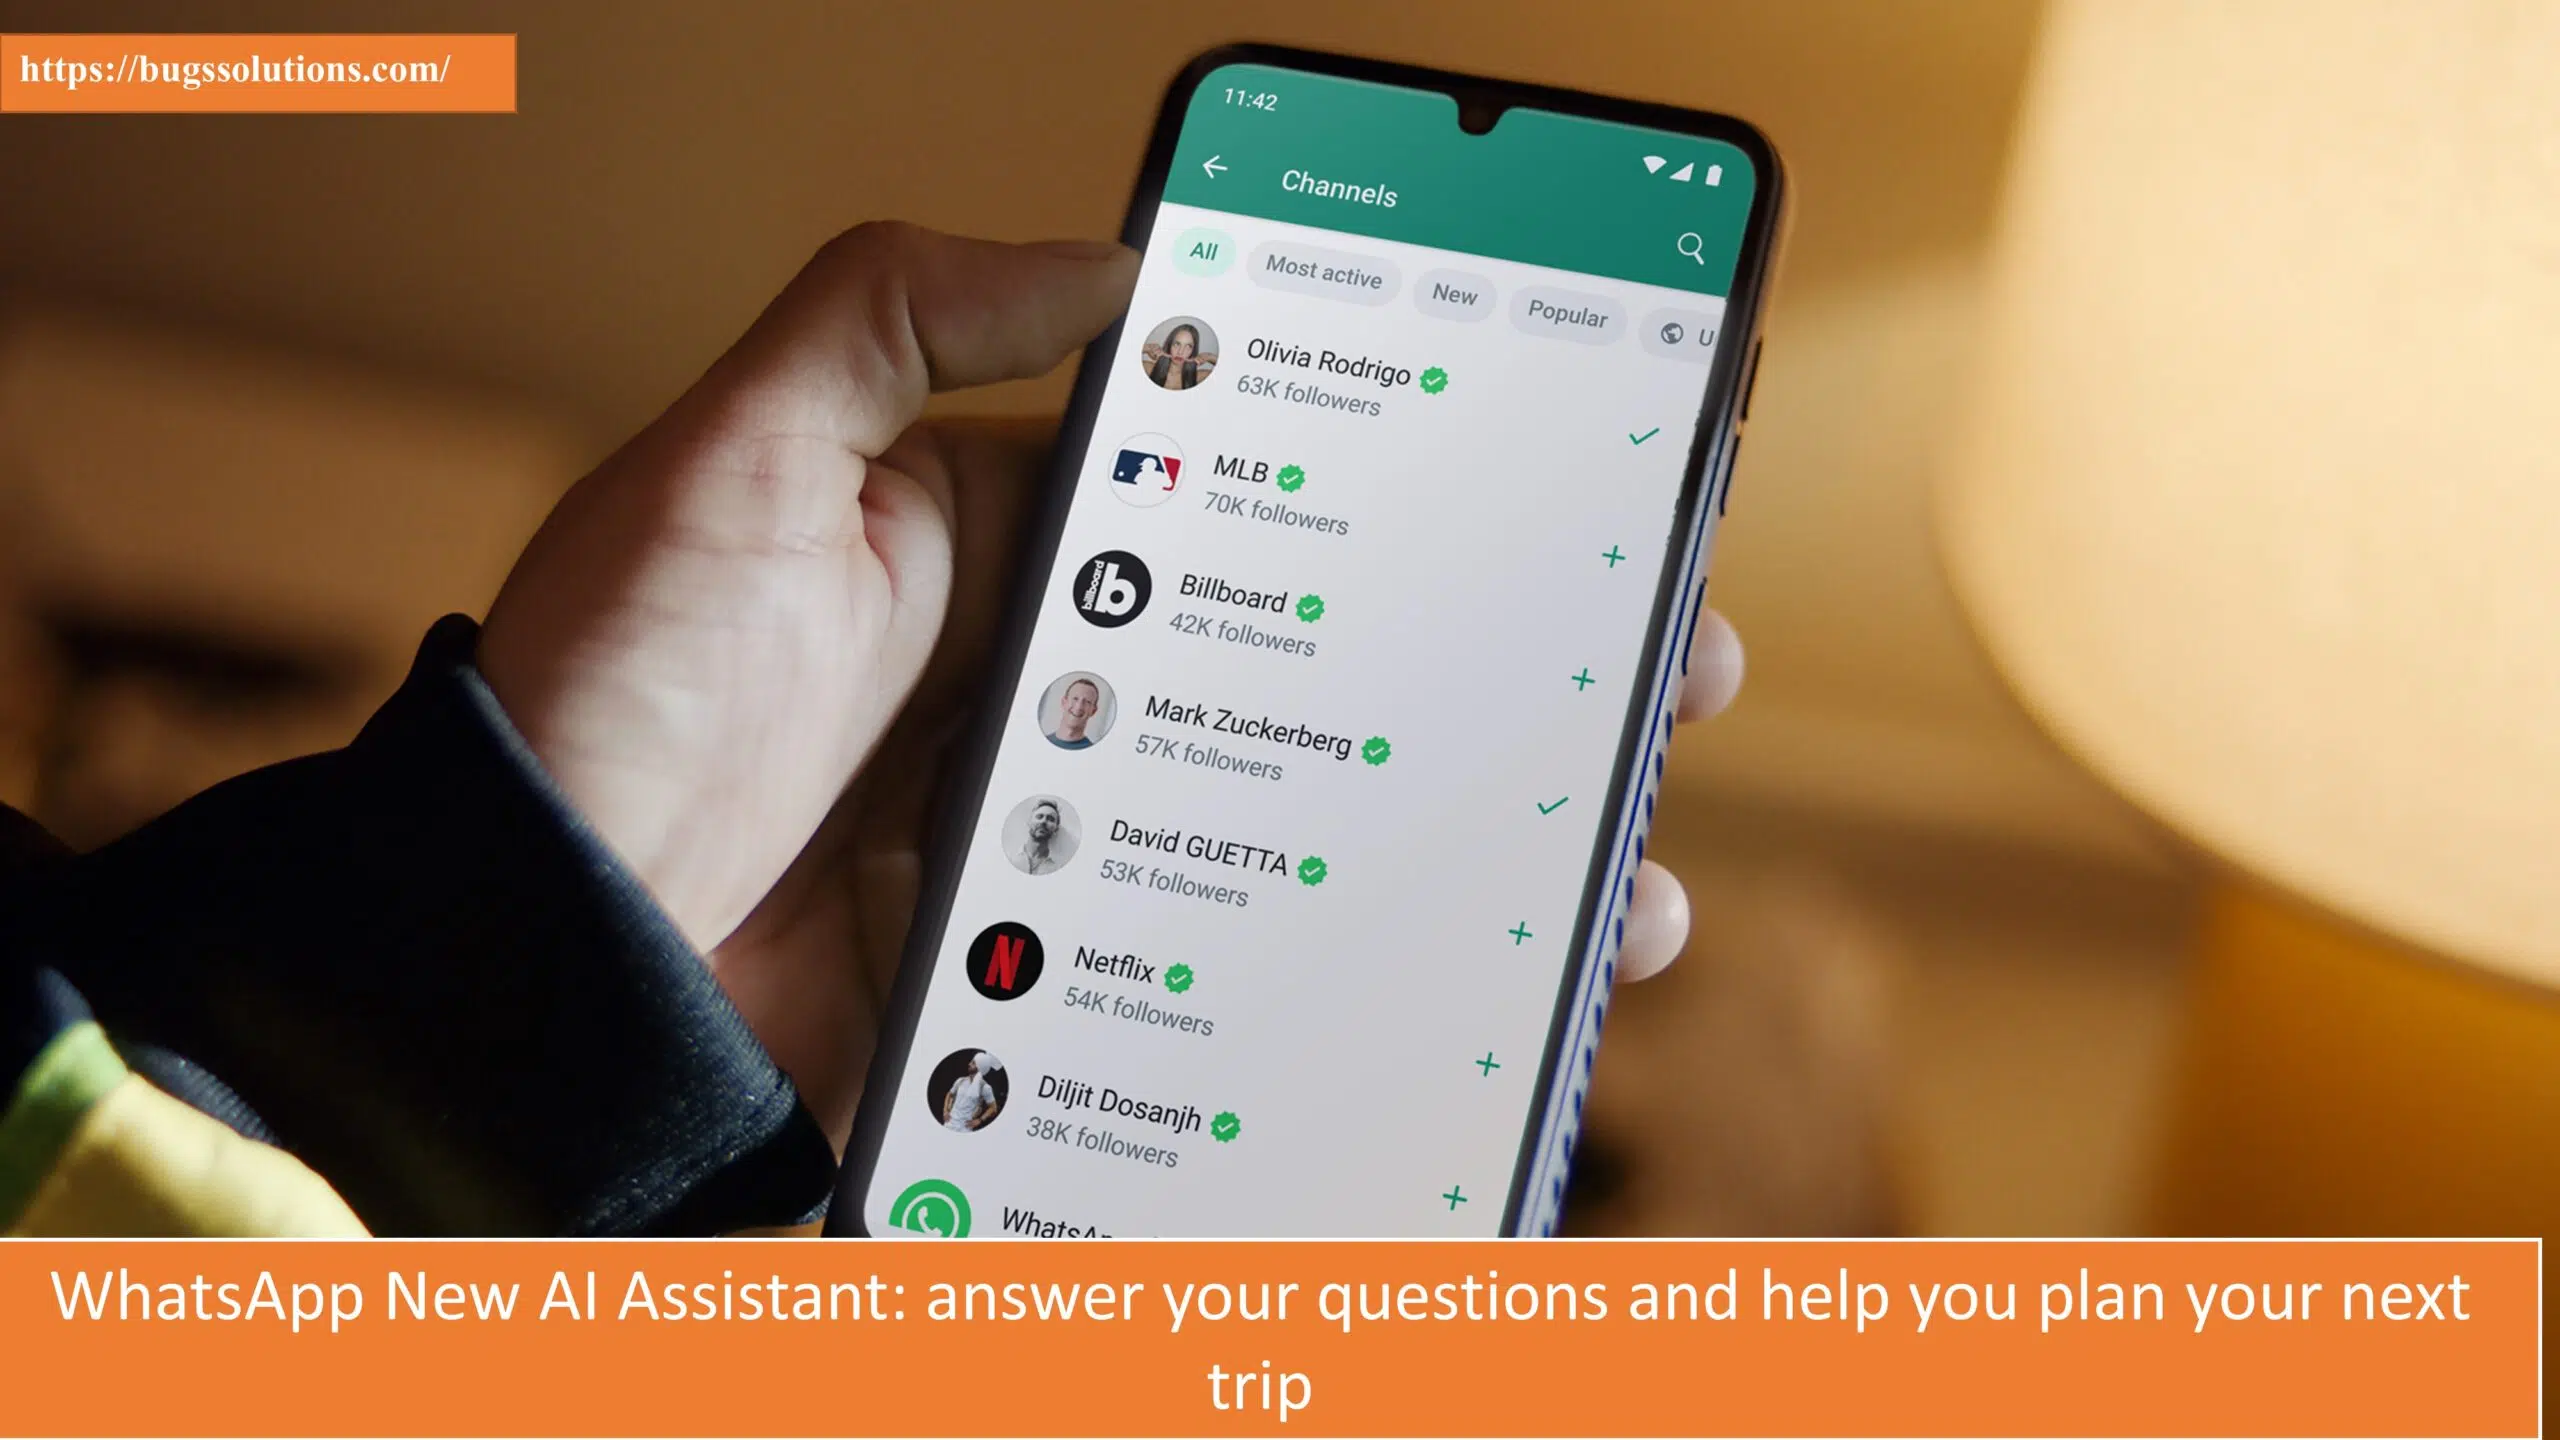 WhatsApp New AI Assistant: answer your questions and help you plan your next trip